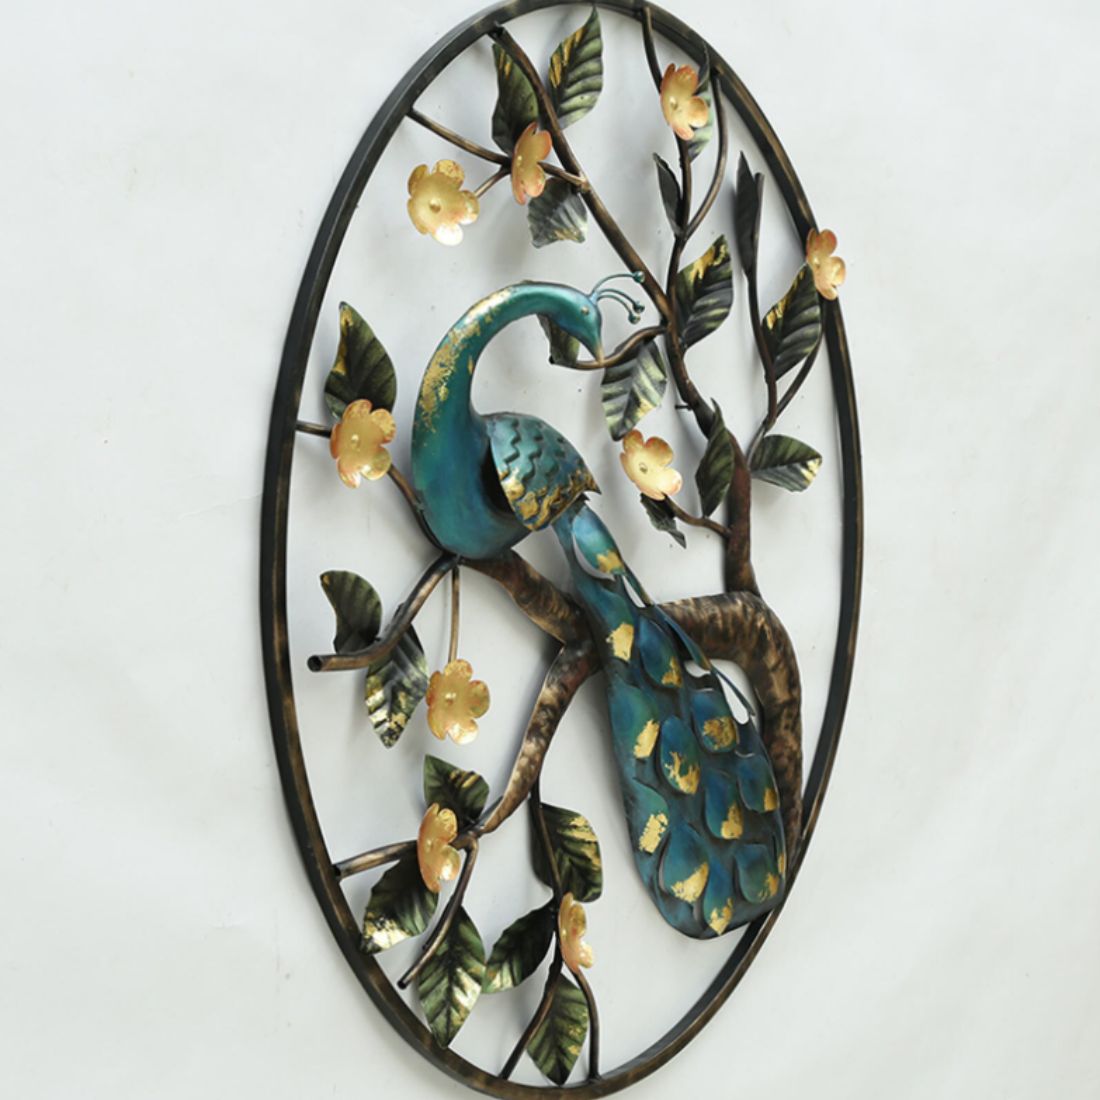 Introducing the Hansart Special Peacock In Circular Ring Metal Wall Art. This stunning piece boasts intricate design featuring a majestic peacock surrounded by a circular ring. Add a touch of elegance and sophistication to your space with this 36 inch diameter artwork.